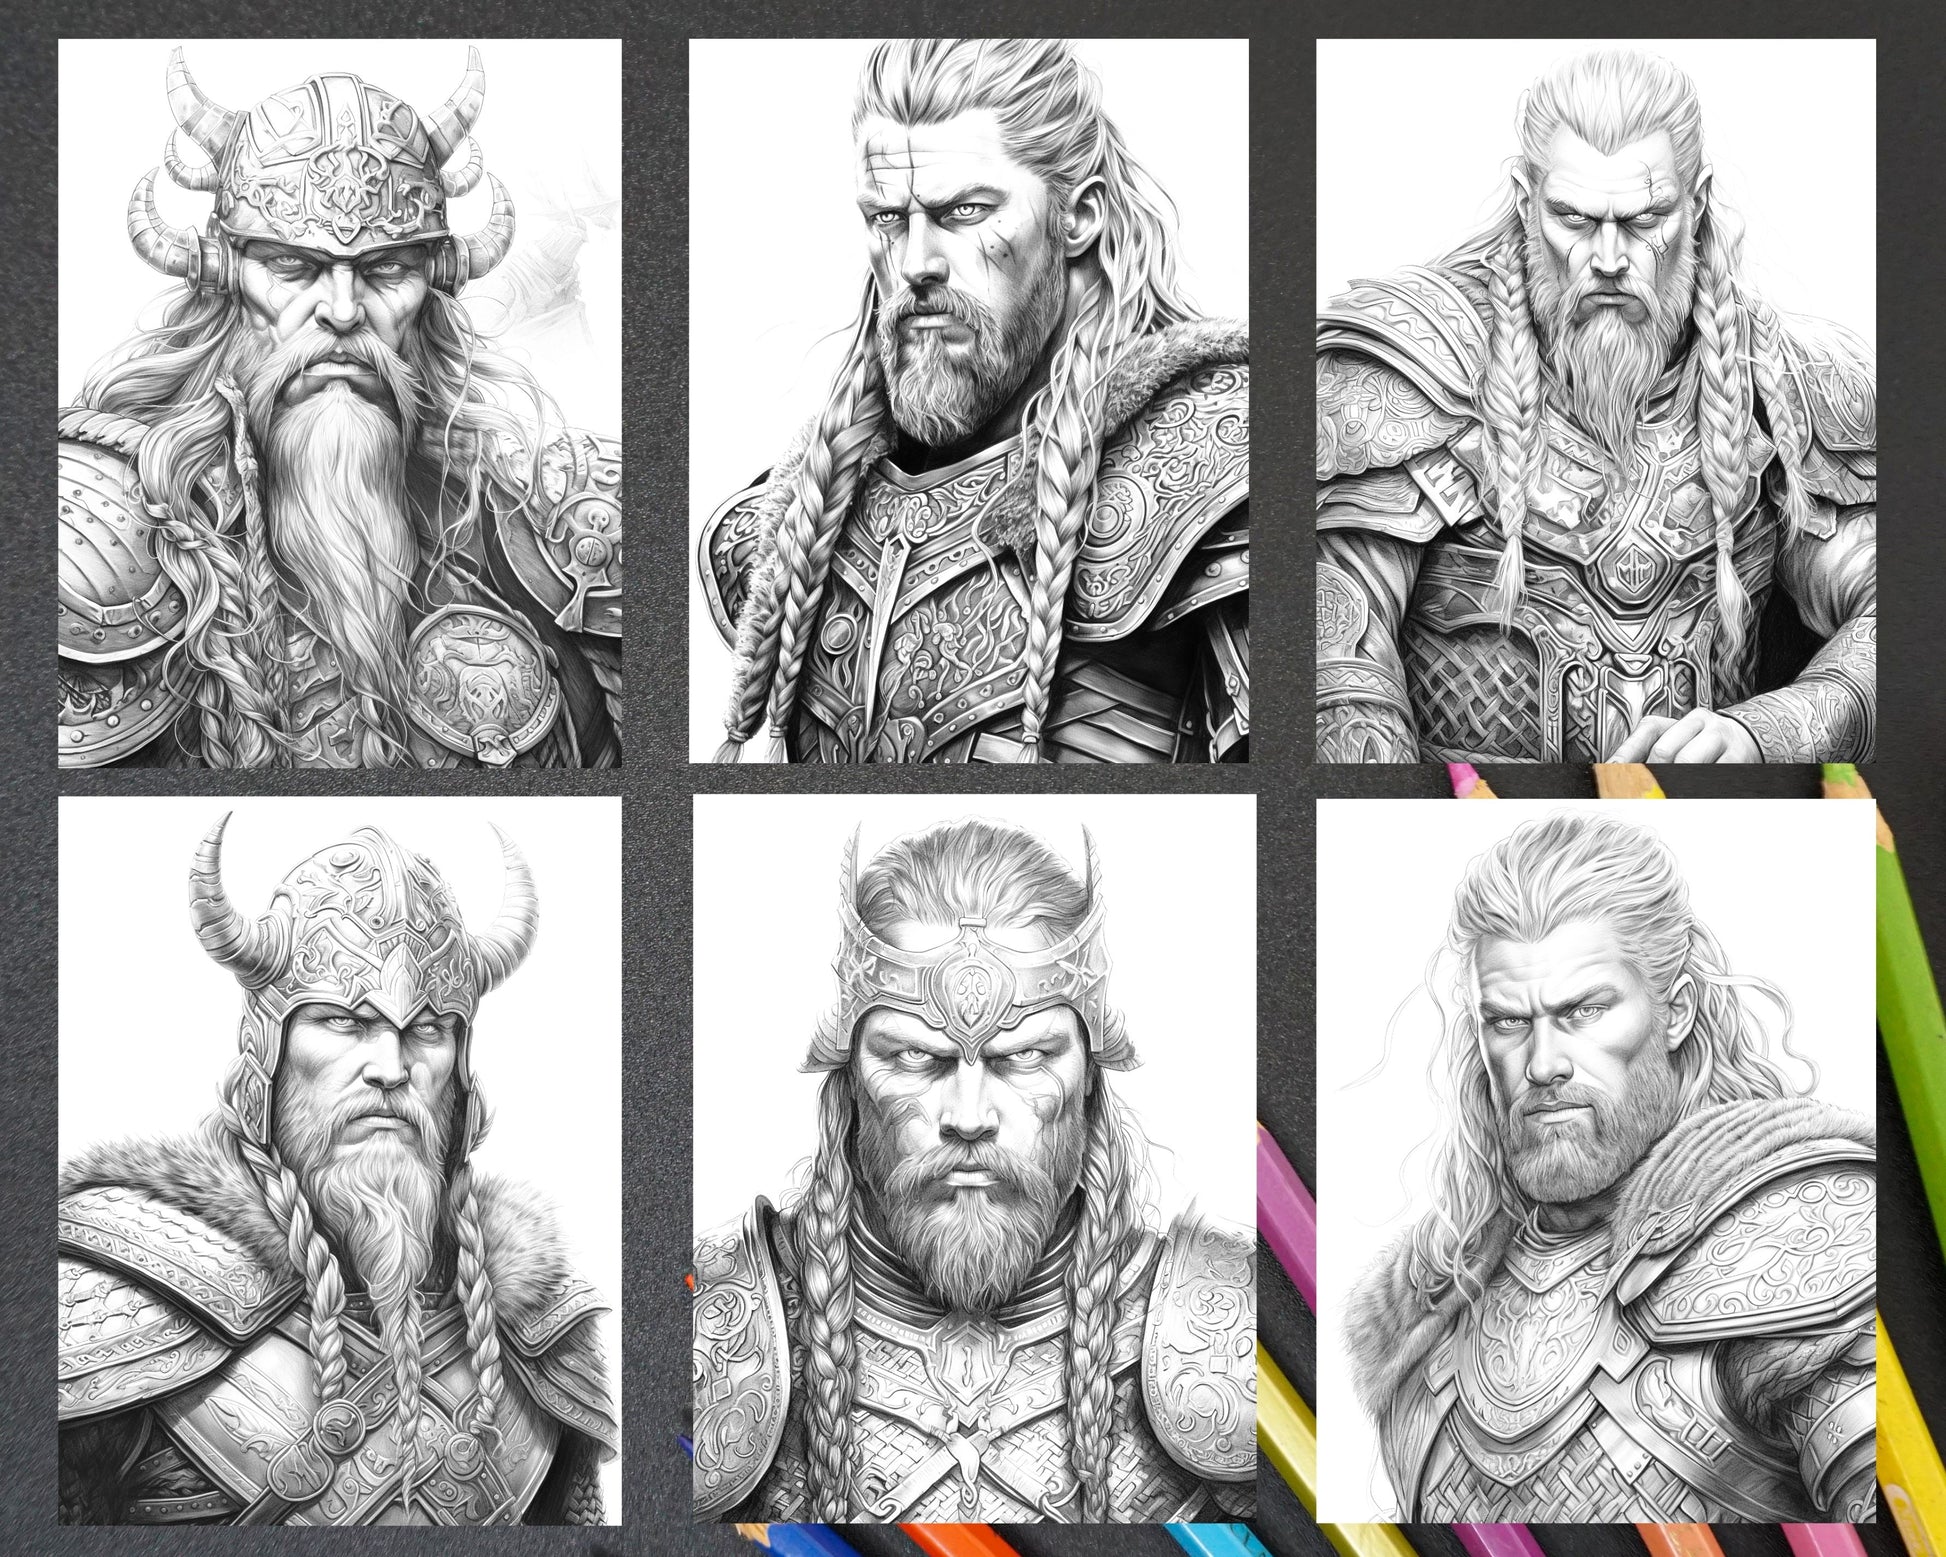 Viking warriors portrait grayscale coloring pages printable for adu â coloring